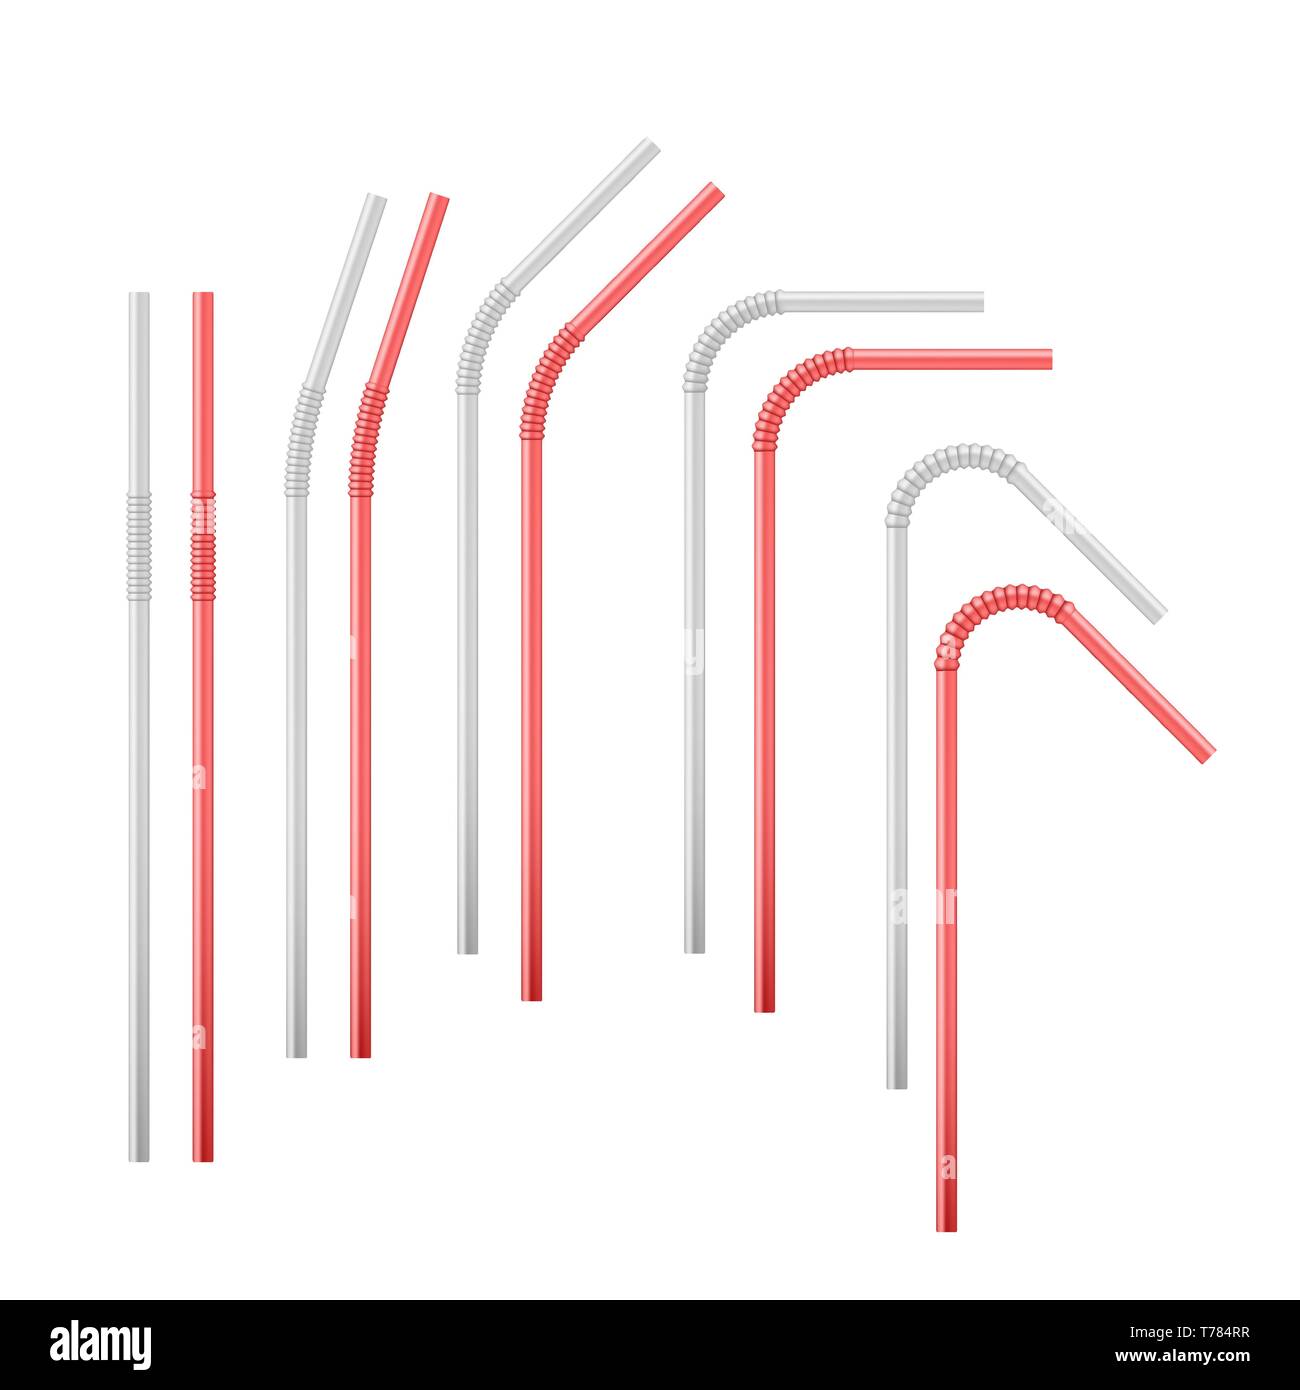 Red and white flexible cocktail straw. Vector illustration isolated on white background Stock Vector